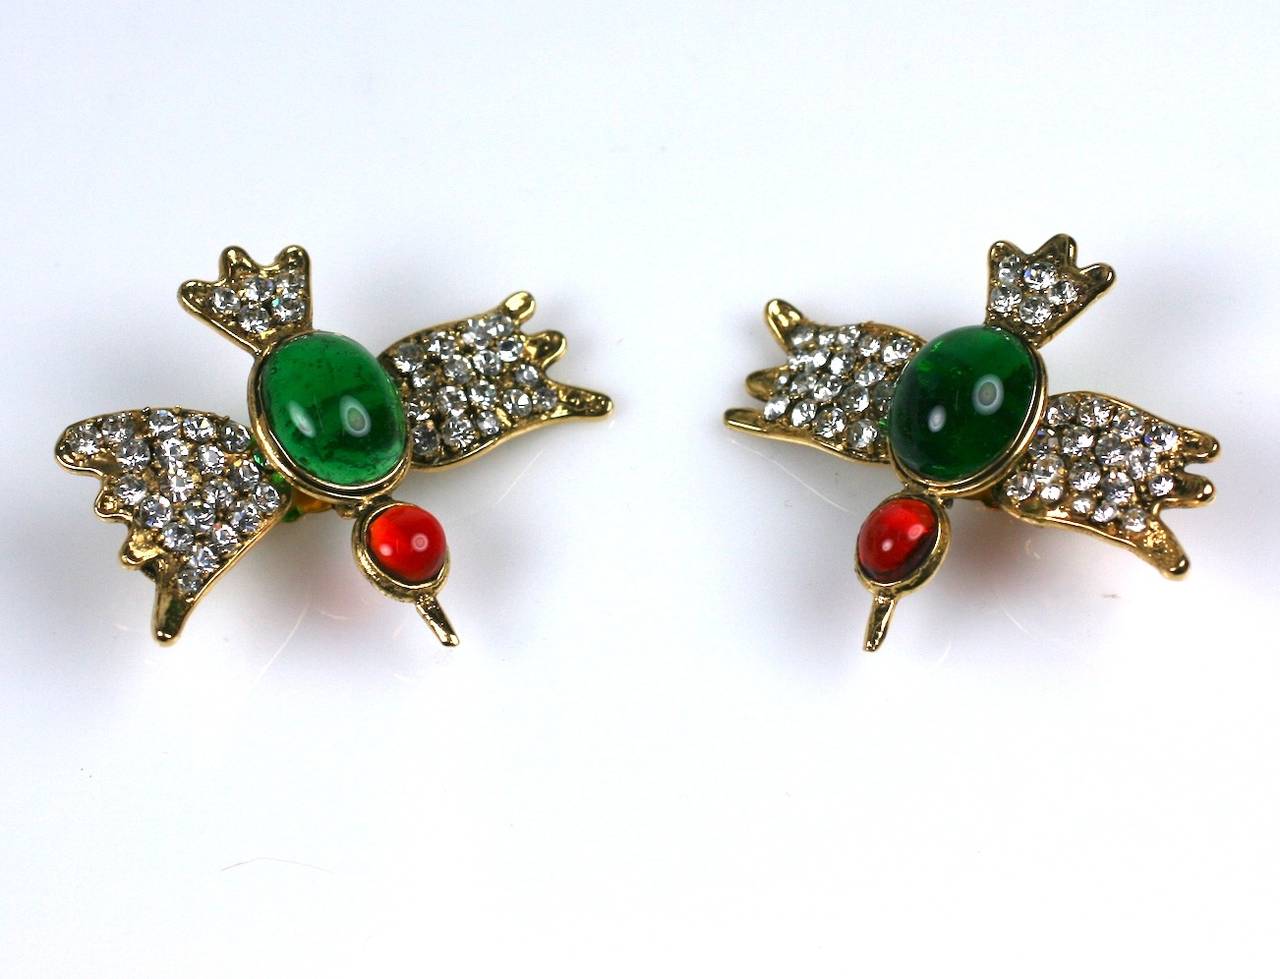 Chanel Sparrow ear  clips of faux ruby and faux emerald poured glass cabochons (Maison Gripoix) set in antique gilt metal with wings and tail, hand prong set with crystal pave stones. 2